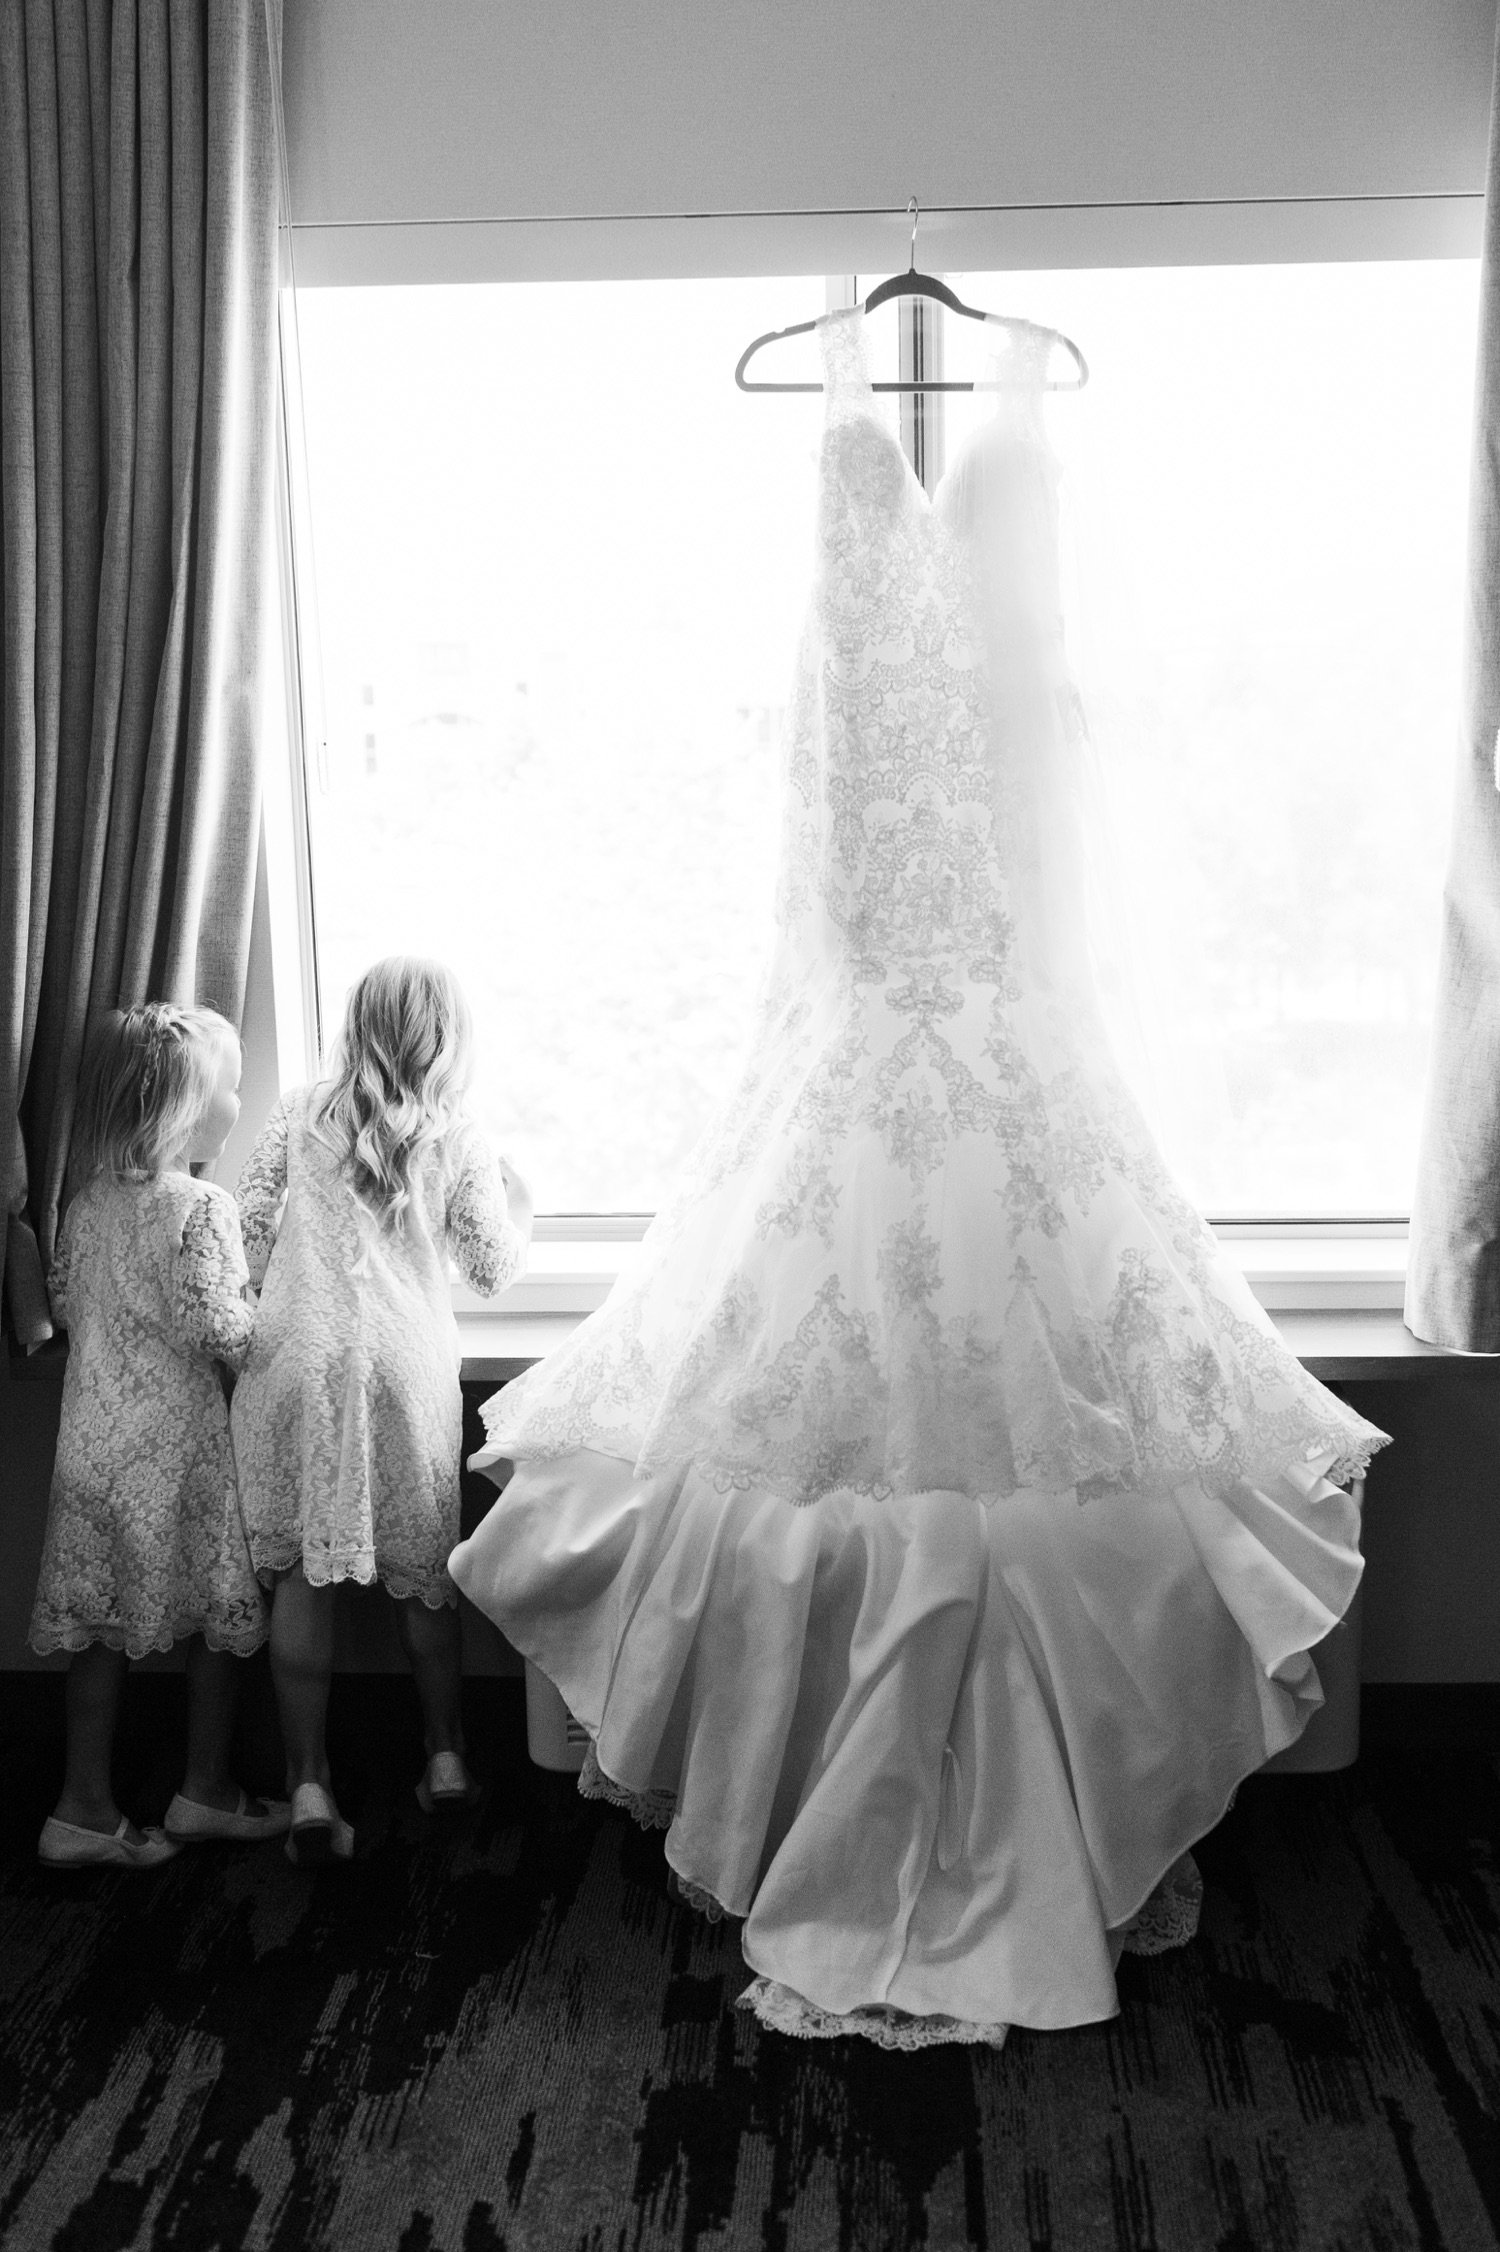 Flower girls looking out the window in expectation next to the bride's wedding dress